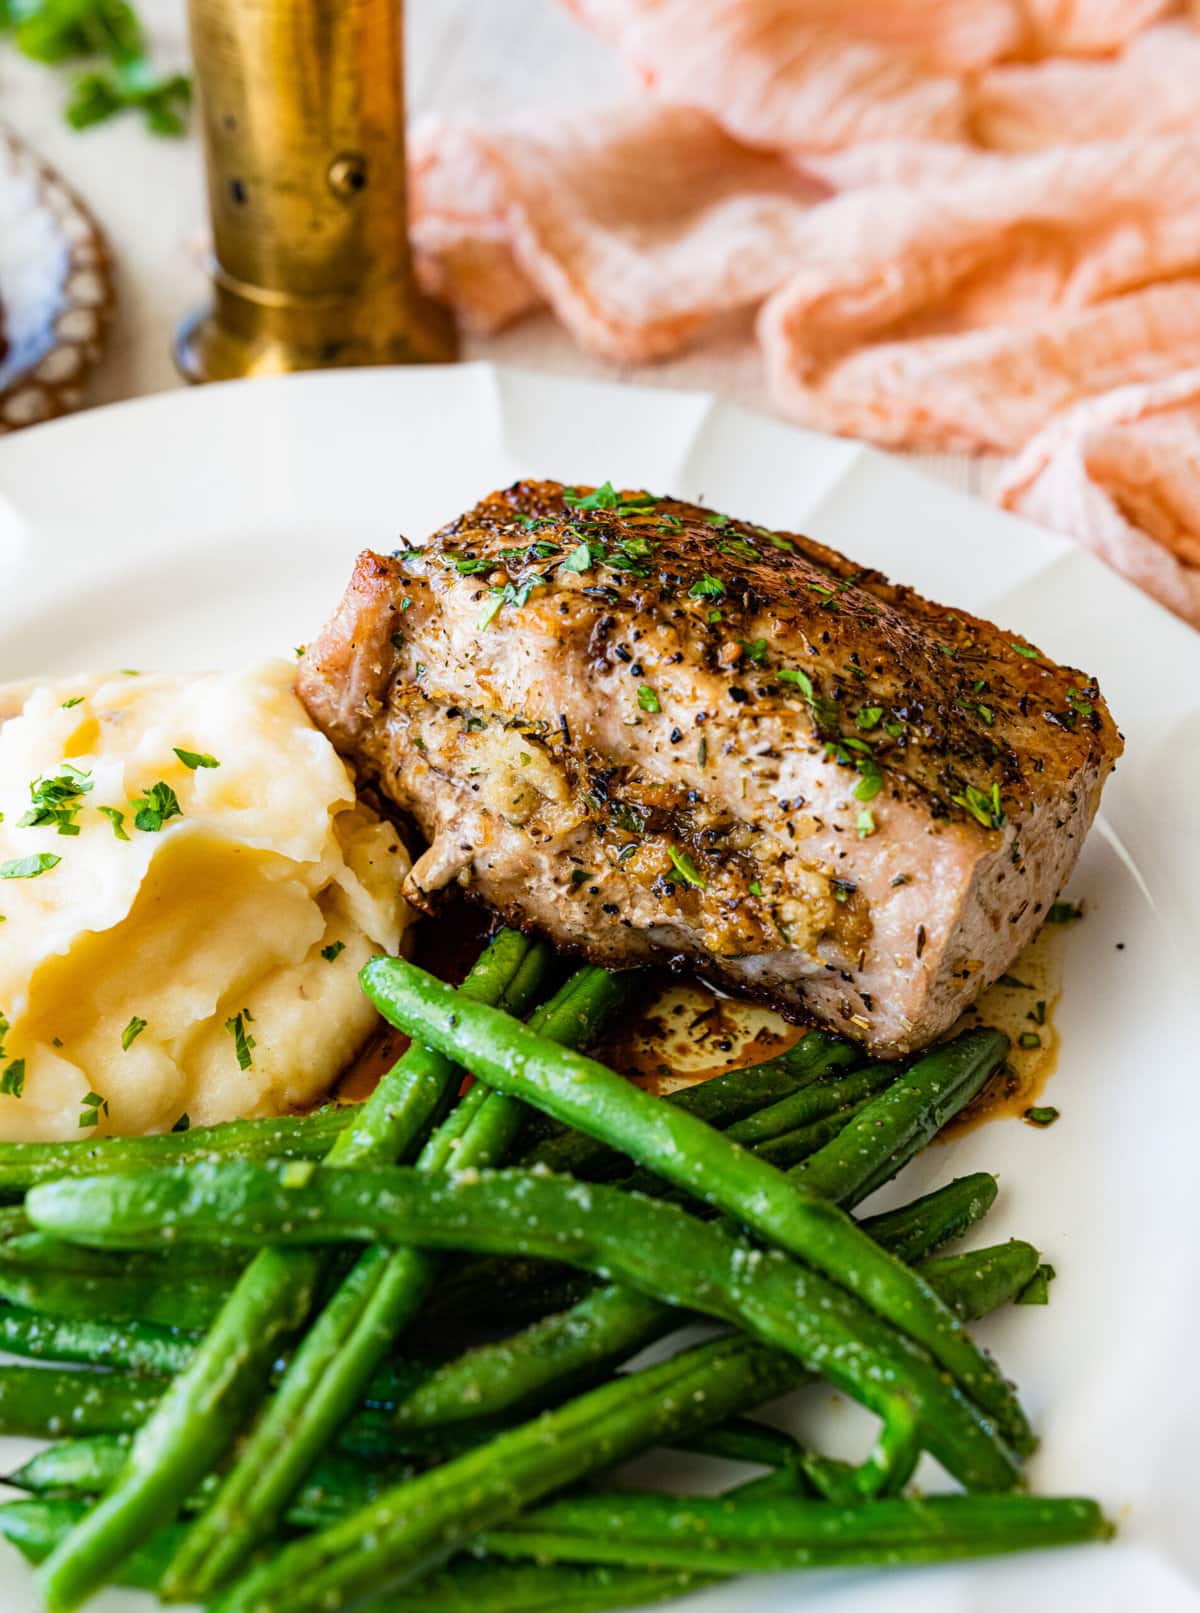 oven baked stuffed pork chop on plate with green beans and mashed potatoes.